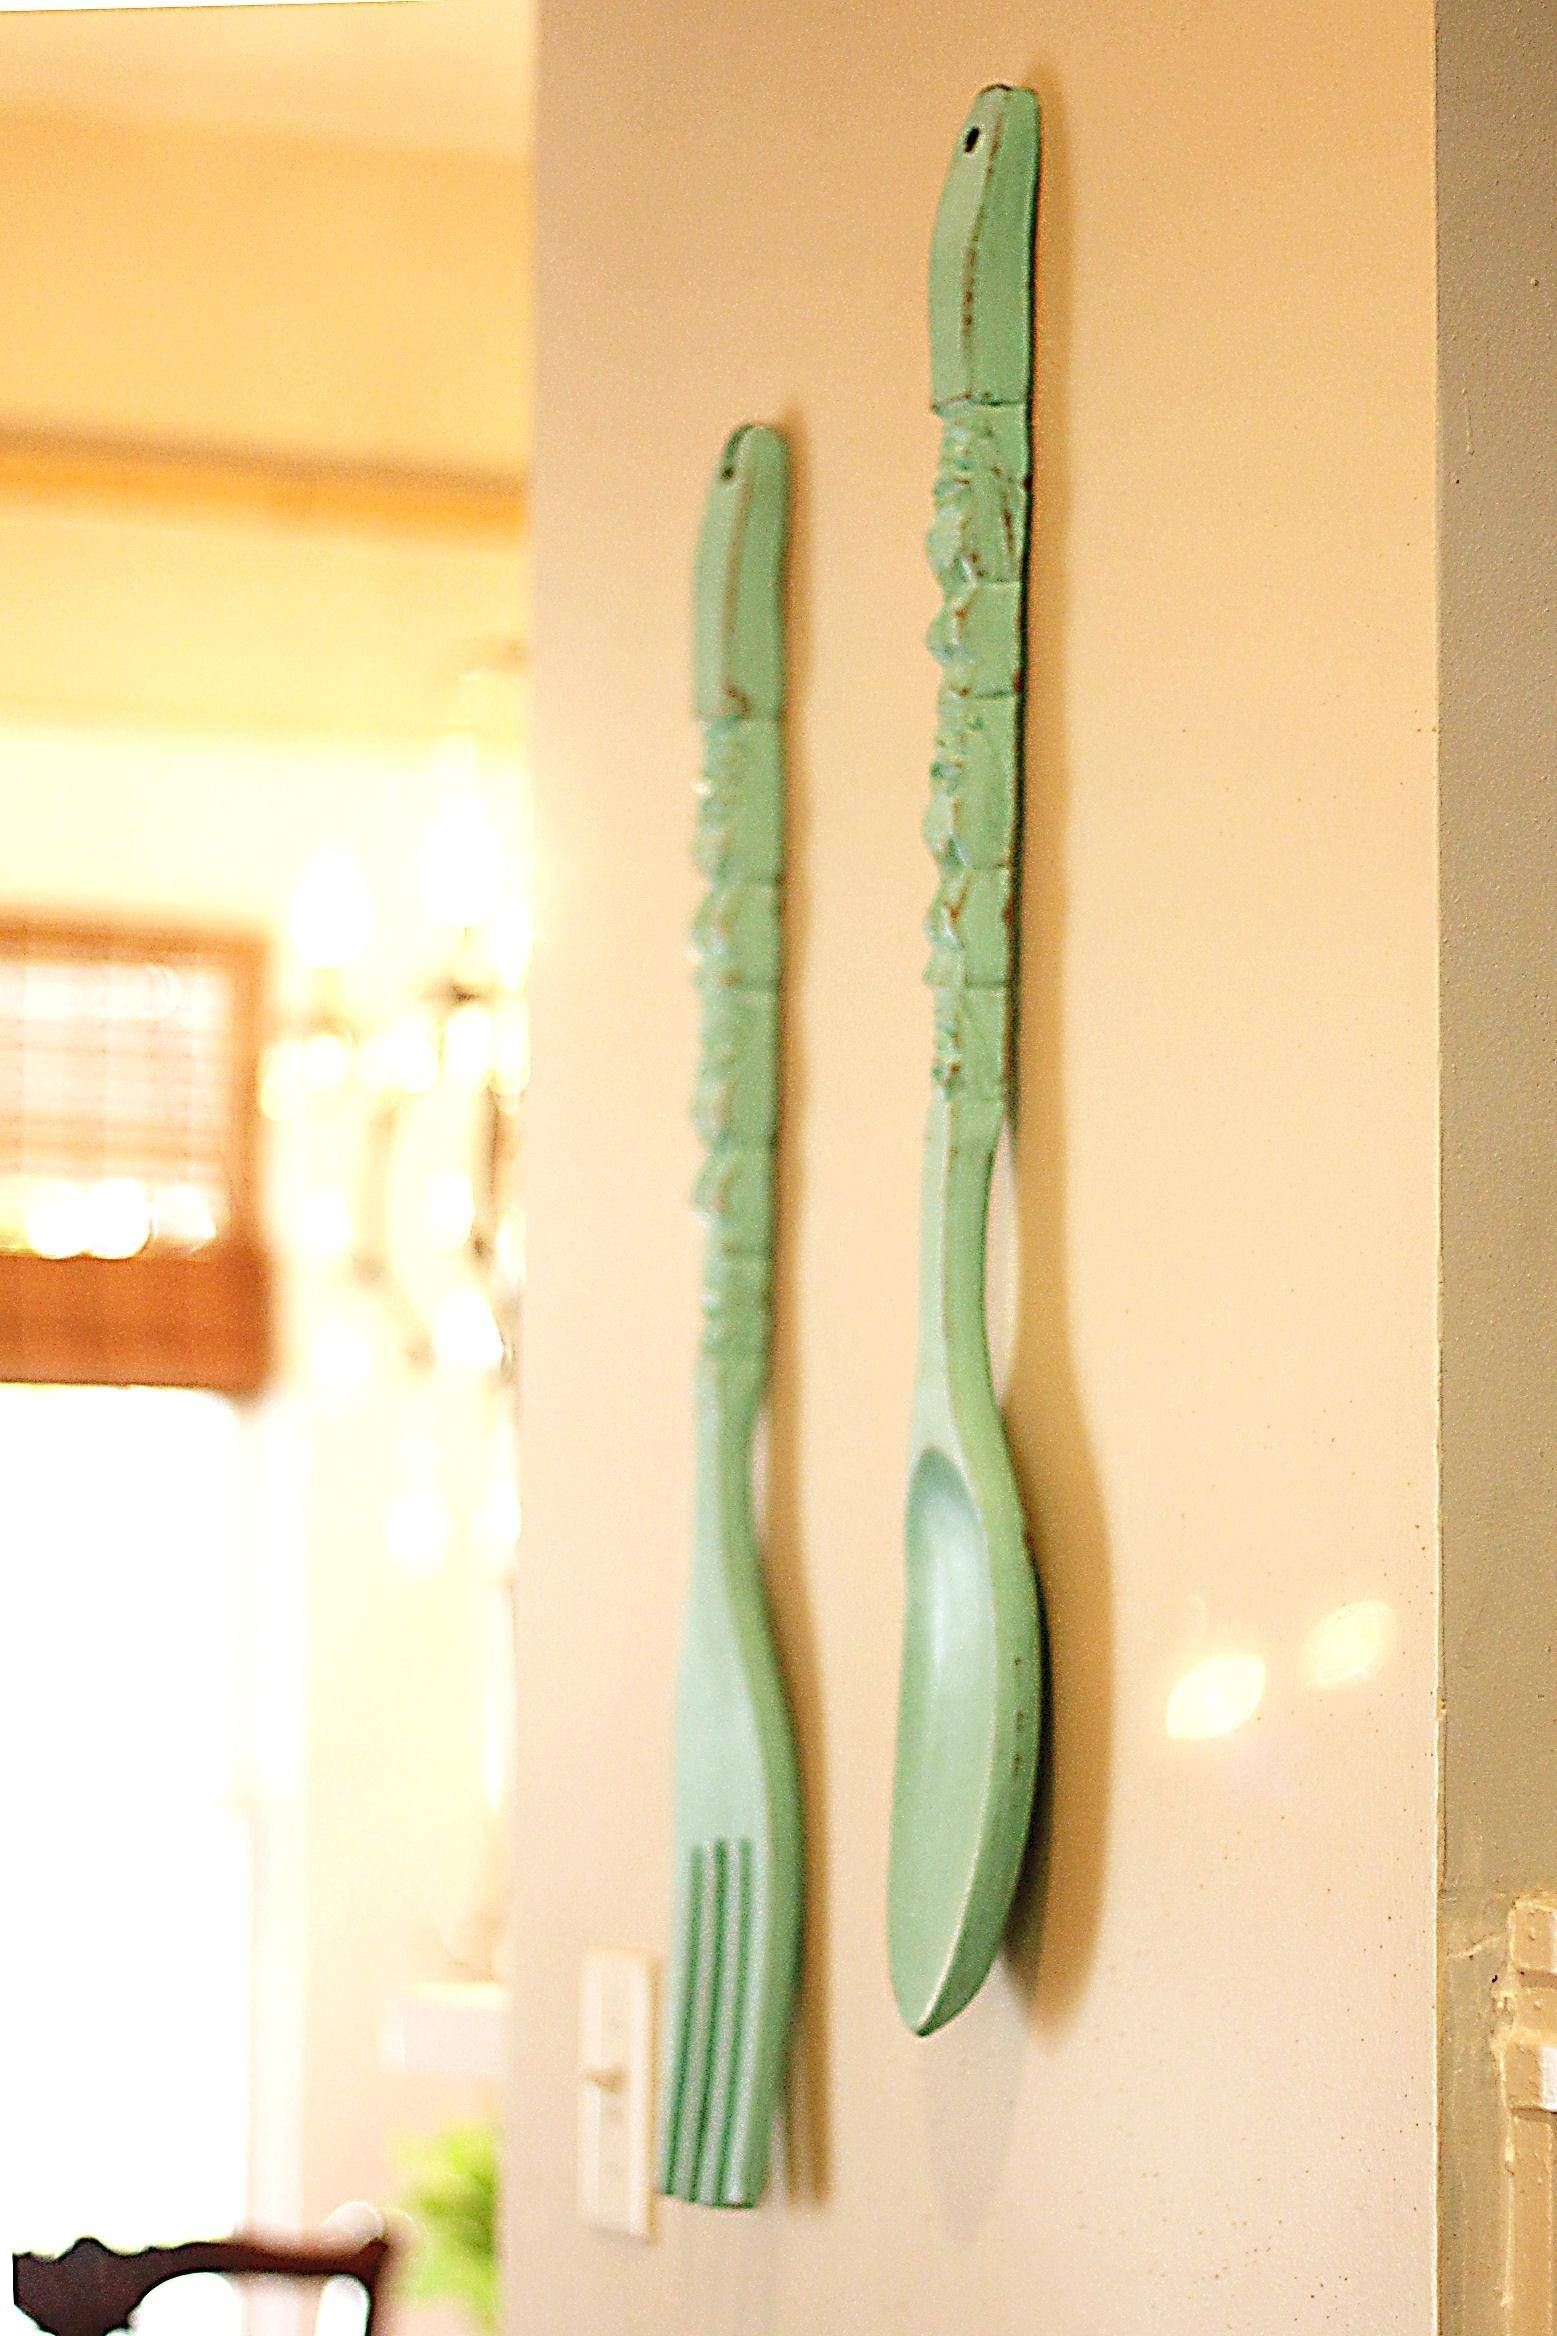 Wall Decor : Vintage Spoon Fork Wall Decor Terrific Kitchen Art Regarding Most Current Giant Fork And Spoon Wall Art (View 8 of 25)